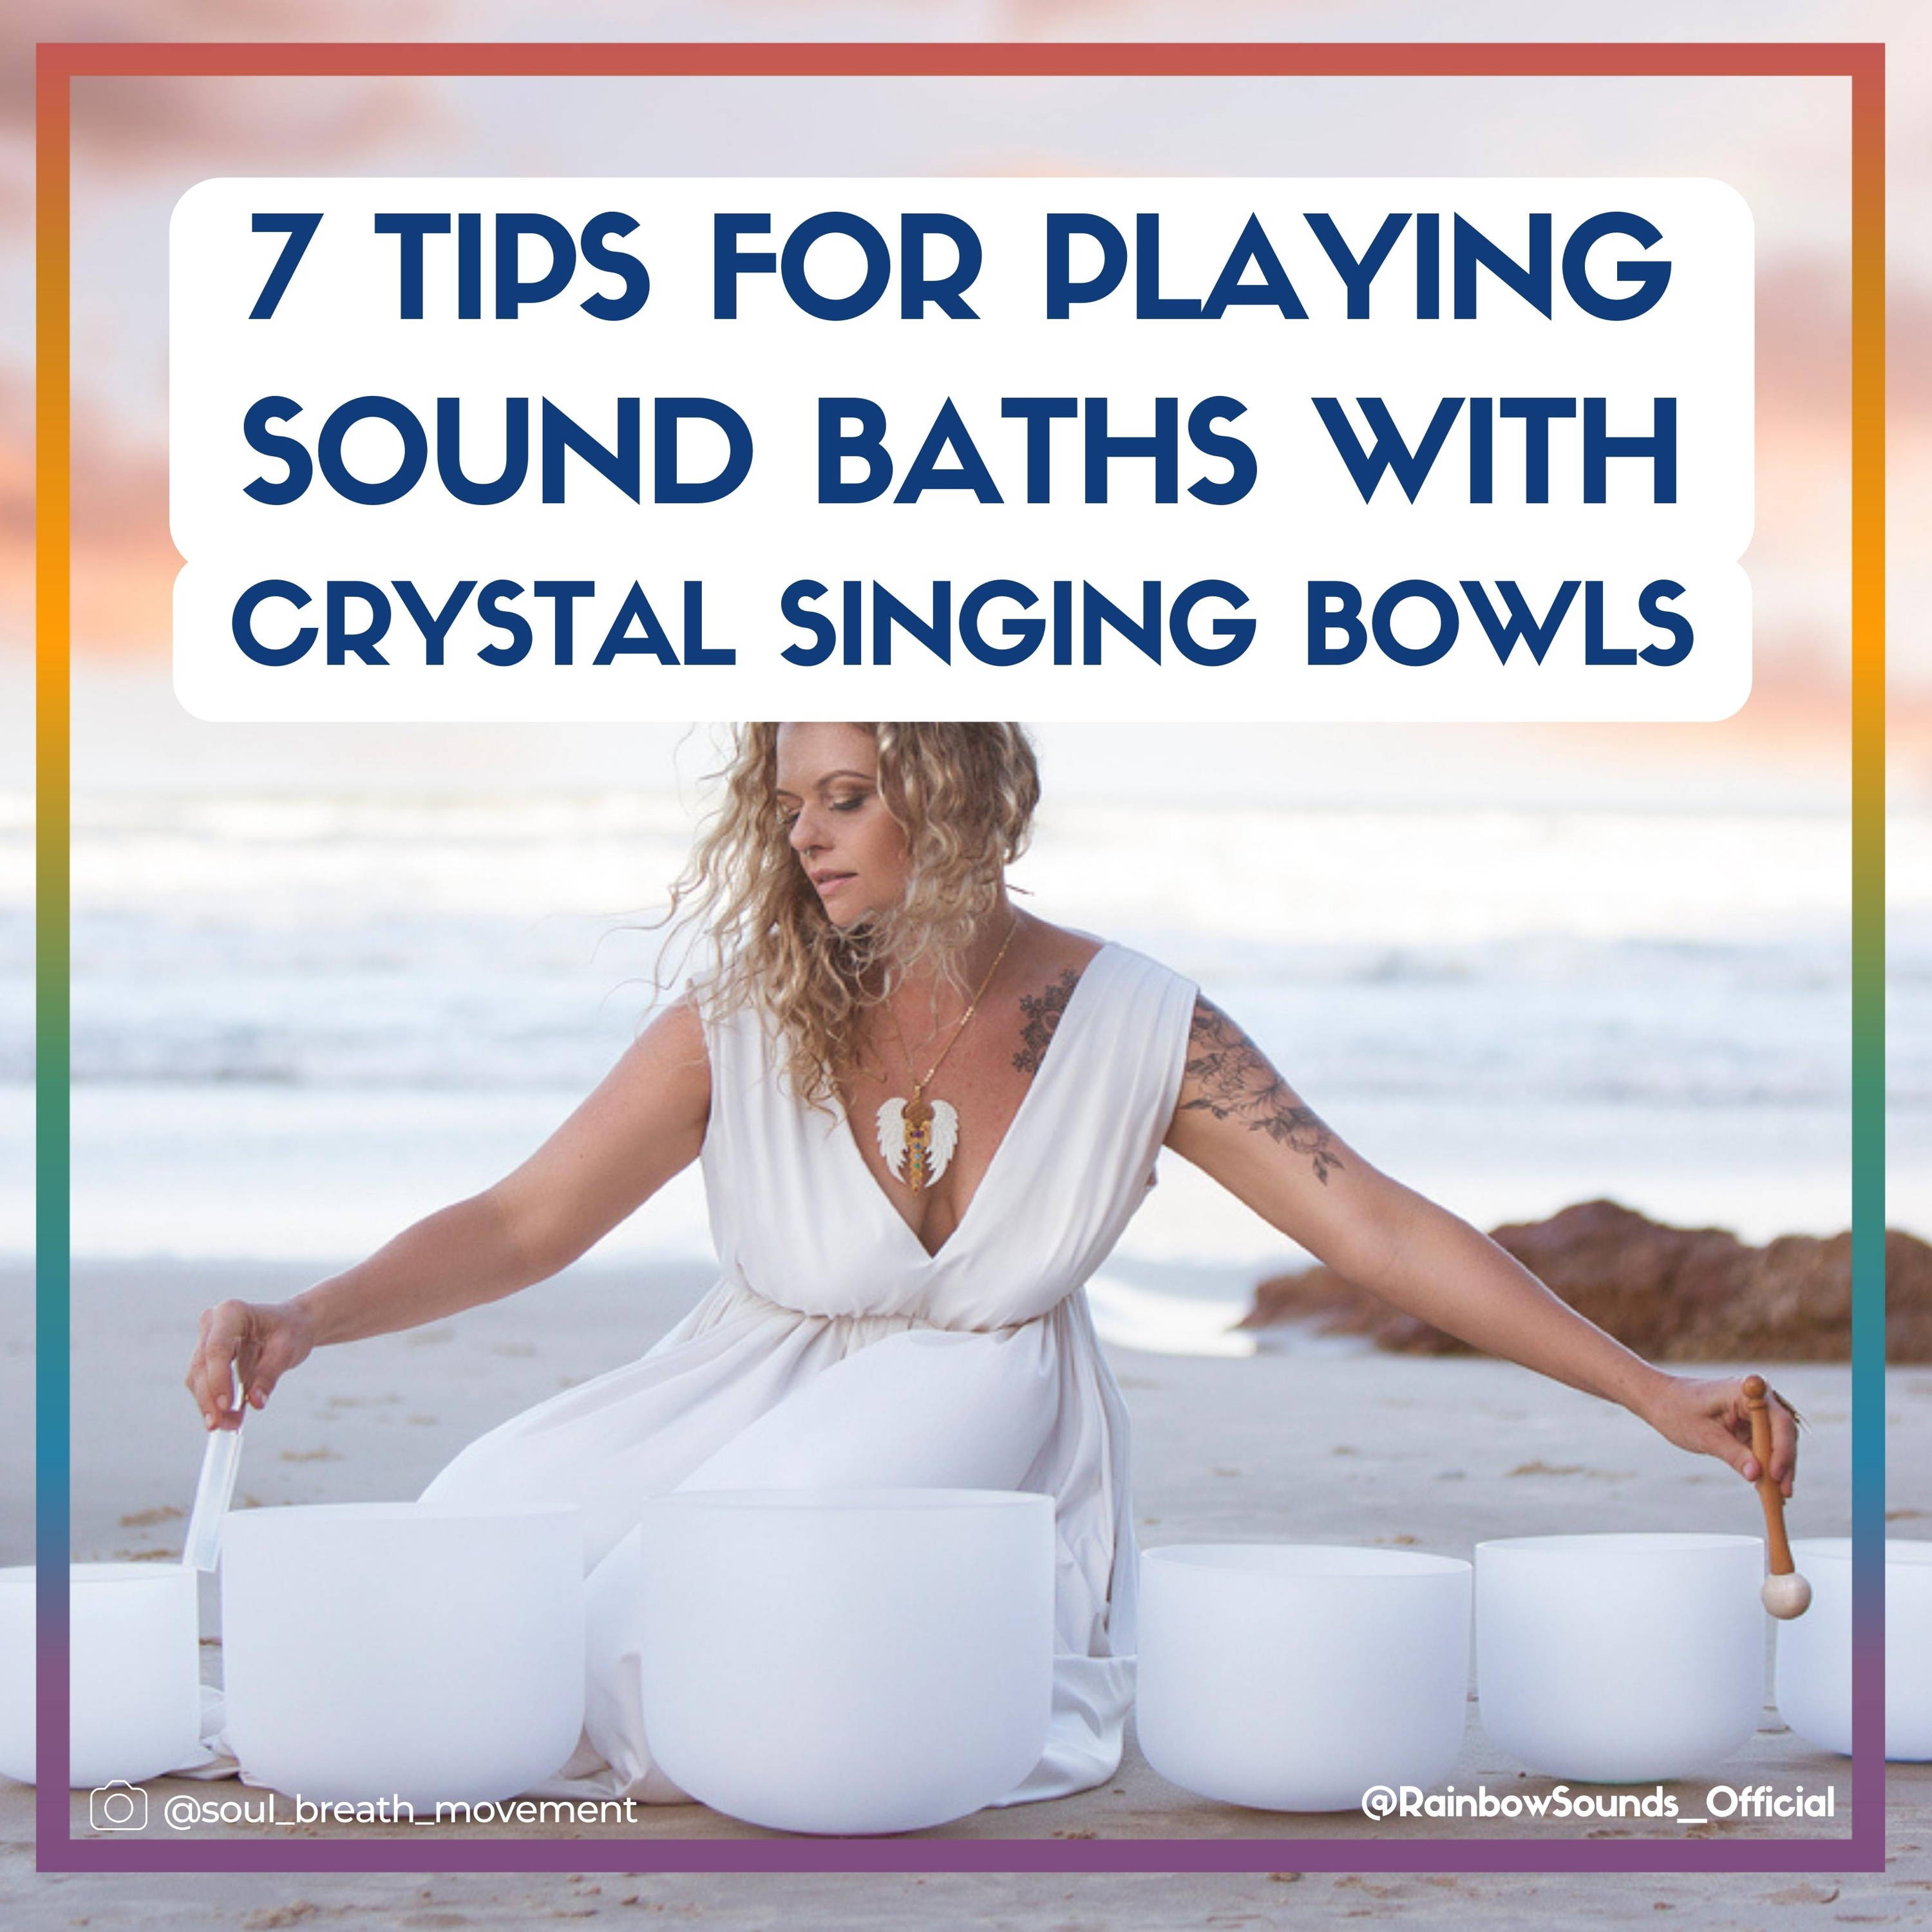 7 Tips for Playing Sound Baths with Crystal Singing Bowls